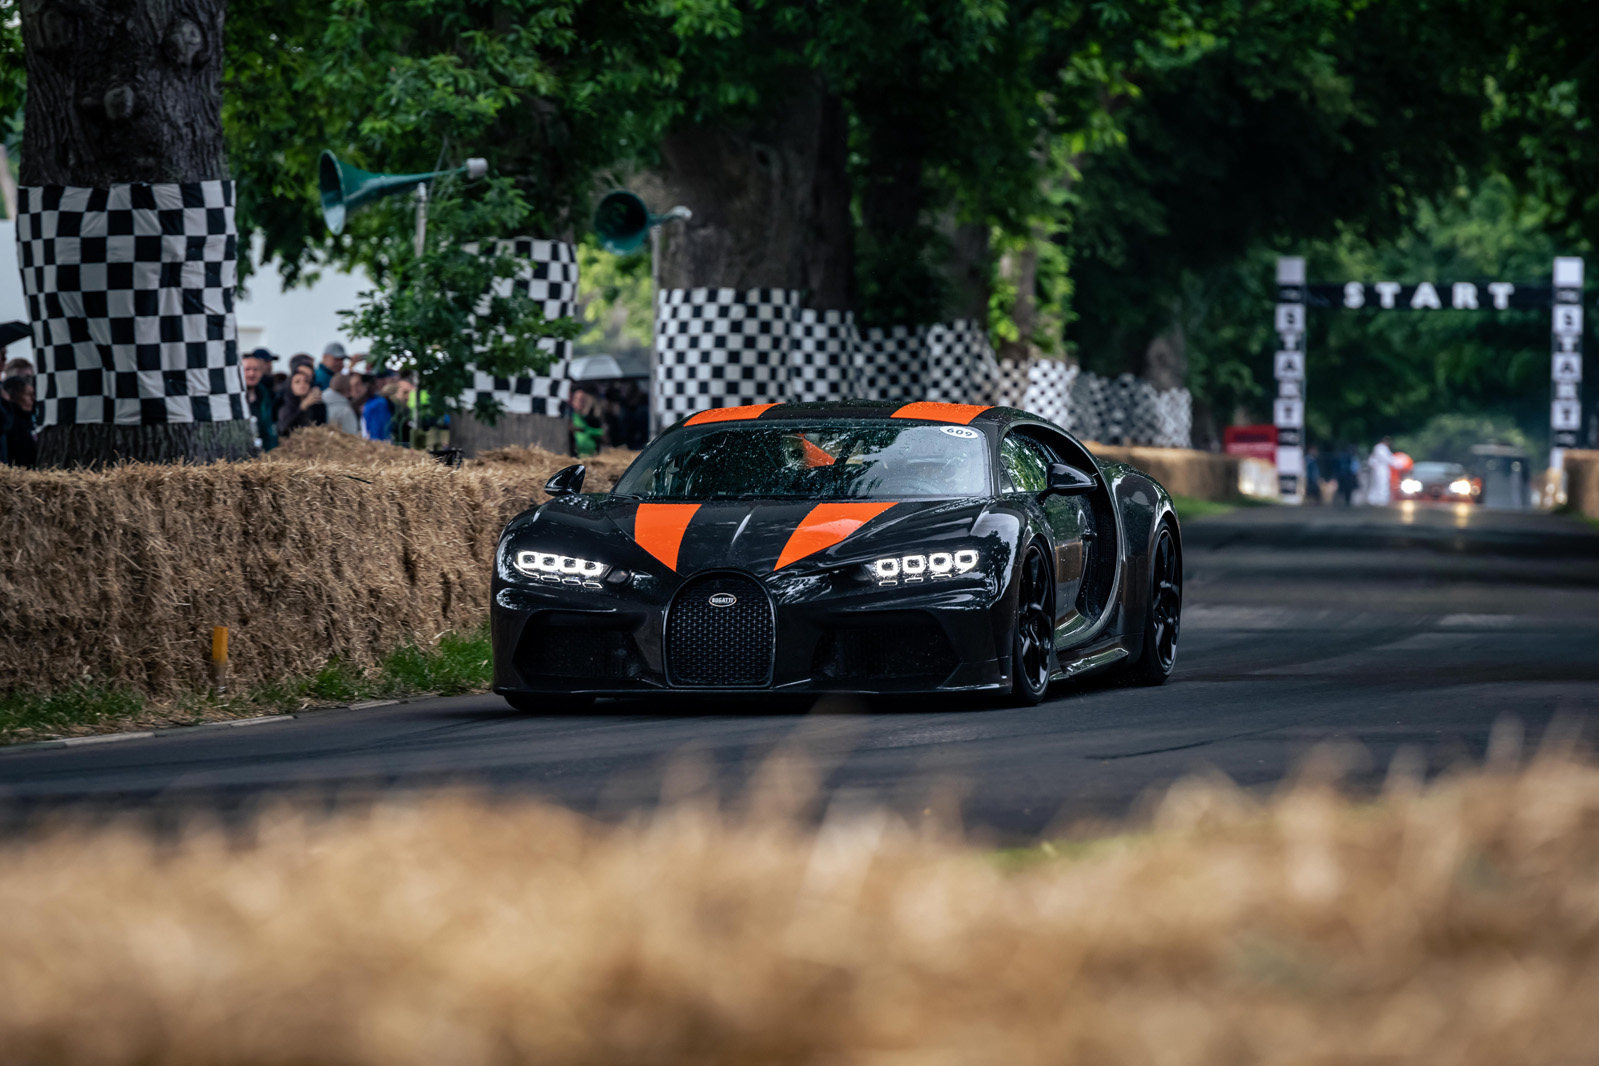 https://www.autocar.co.uk/sites/autocar.co.uk/files/images/car-reviews/first-drives/legacy/99_bugatti_chiron_goodwood.jpg